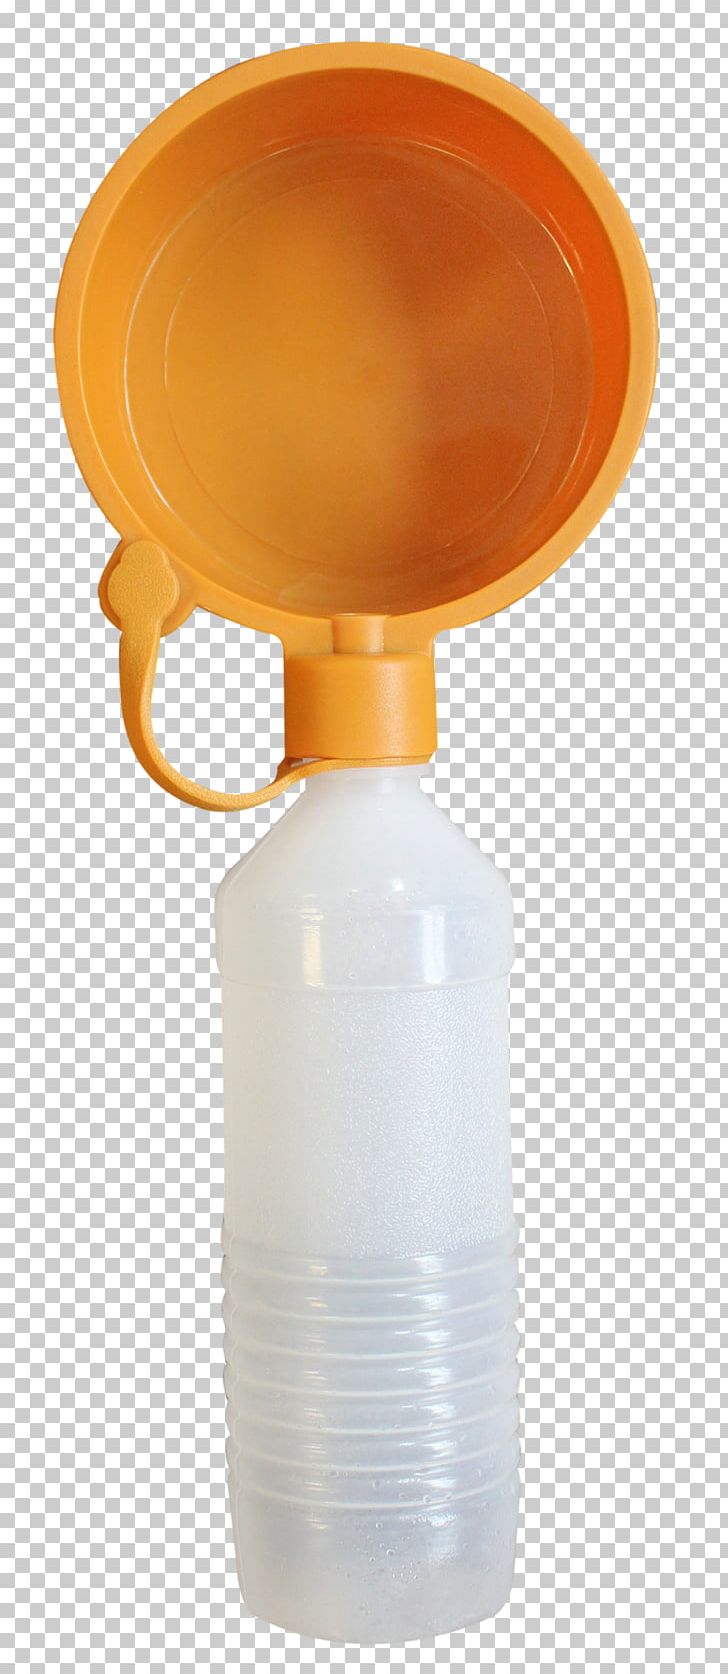 Dog Raw Feeding Bottle Plastic The Barf Shop PNG, Clipart, Animals, Bottle, Bowl, Camping, Comarch Free PNG Download